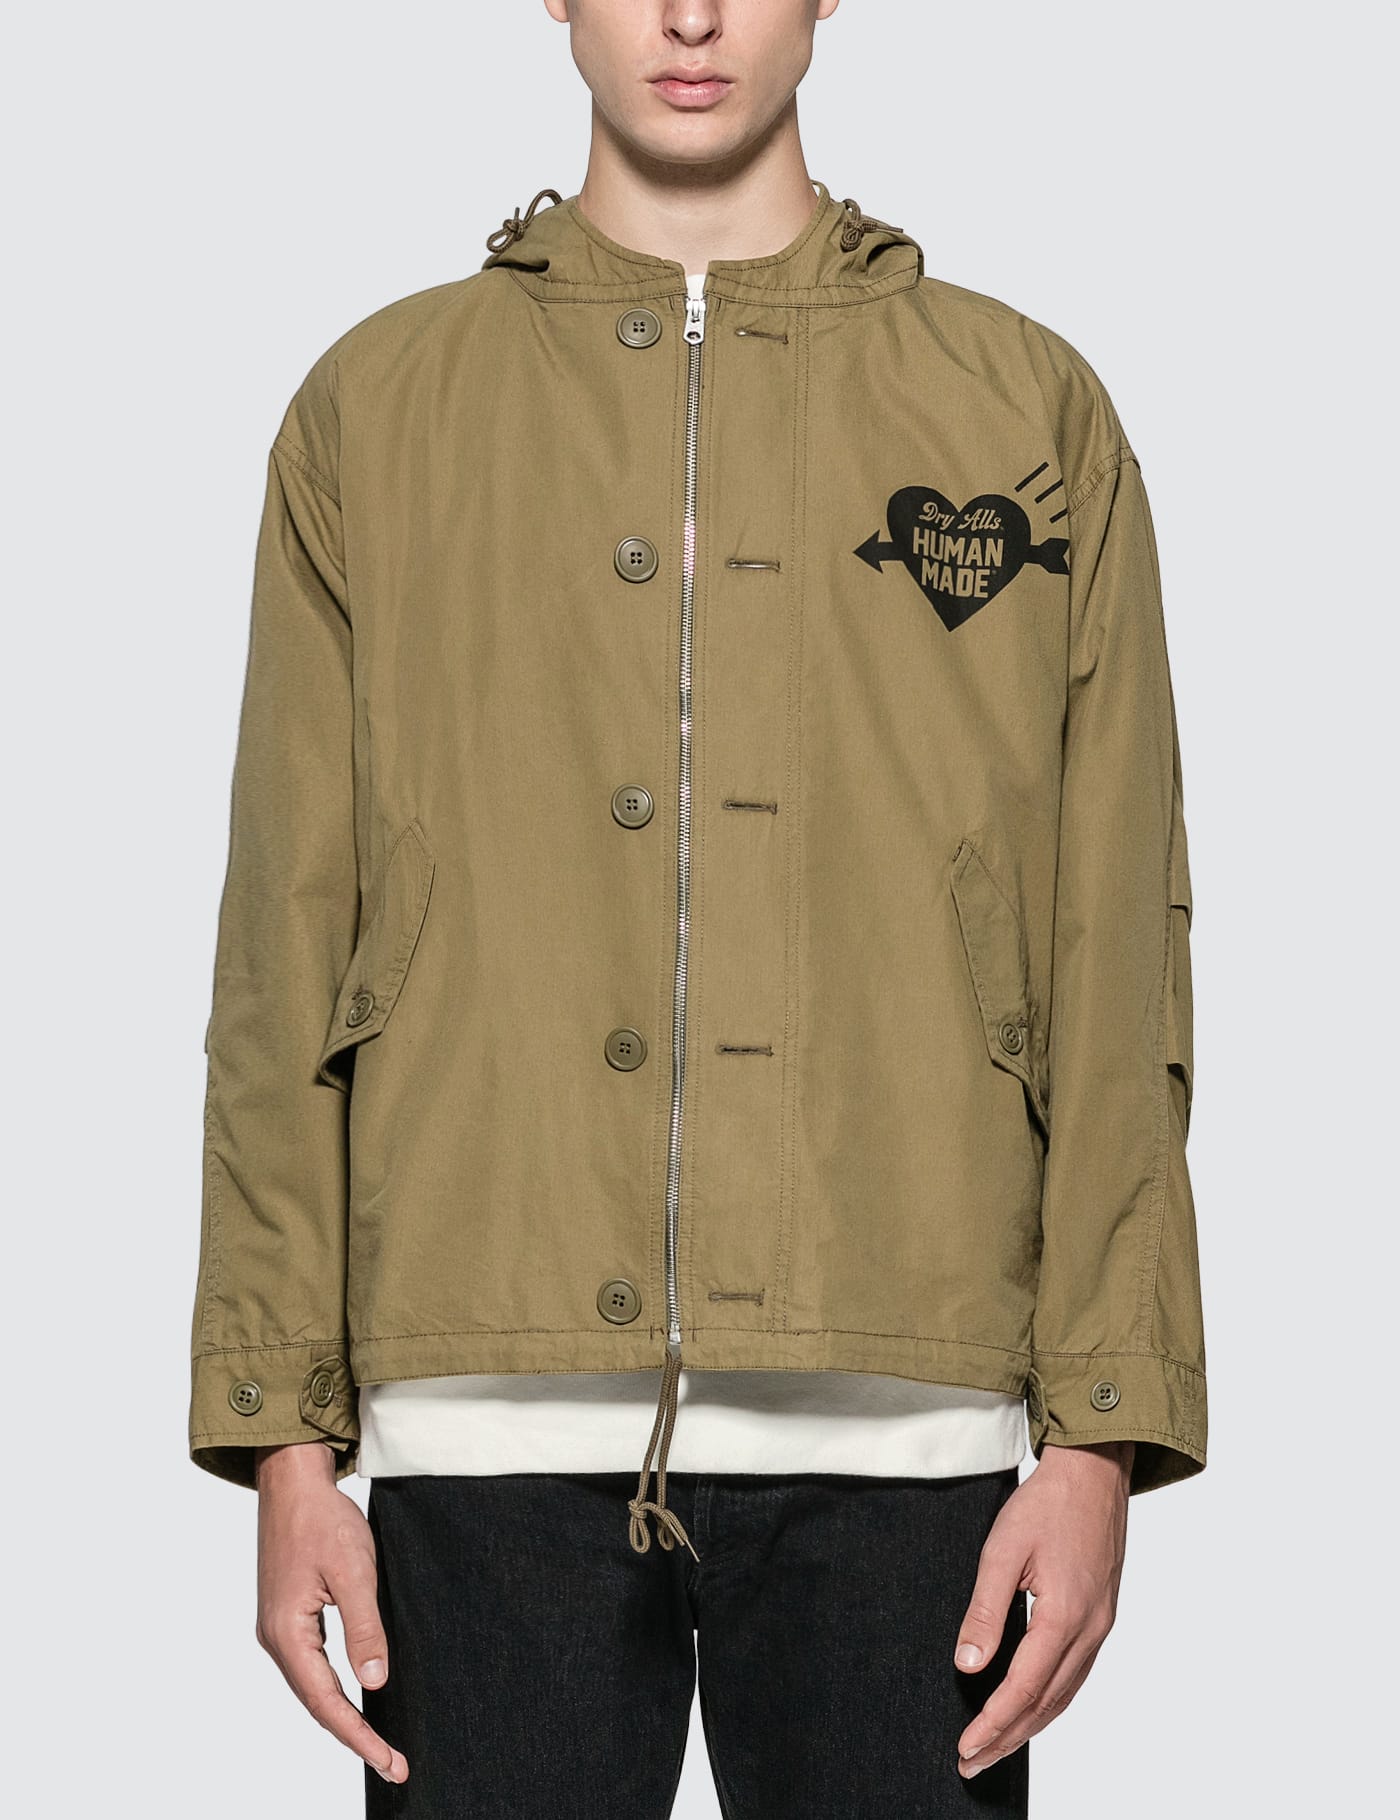 Human Made - Military Short Jacket | HBX - Globally Curated